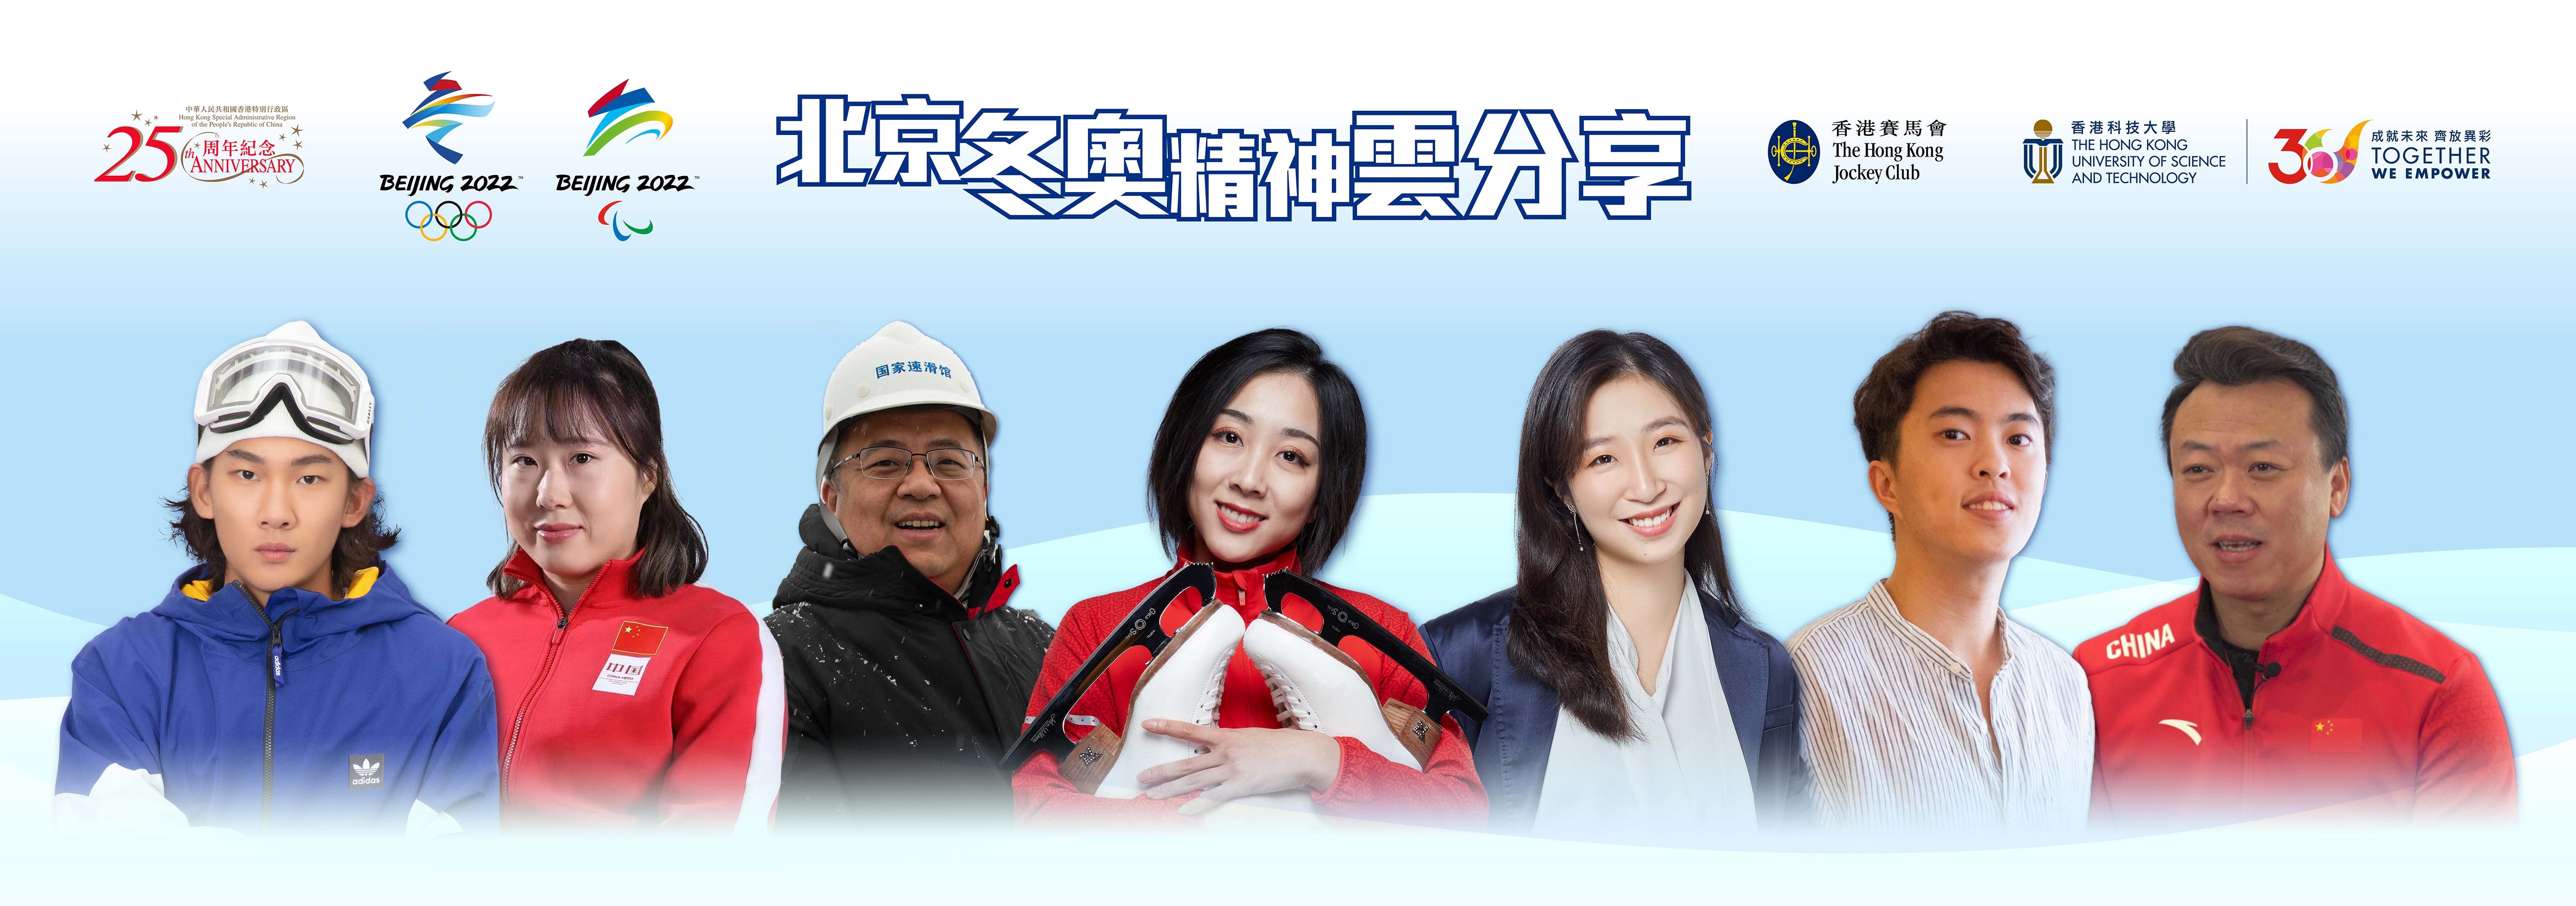 (From left) SU Yiming, Gold Medalist for Snowboarding Big Air; YAN Zhuo, Gold Medalist for Wheelchair Curling; WU Xiaonan, Director of the Operations Team of the National Speed Skating Oval; SUI Wenjing, Gold Medalist for Pairs Figure Skating; LI Jiaxin, Beijing Winter Olympics volunteer; Sidney CHU, Beijing Winter Olympics Hong Kong’s flag-bearer and Short Track Speed Skater and ZHAO Hongbo, Chief Coach of China’s National Figure Skating Team, participated in the sharing session. 